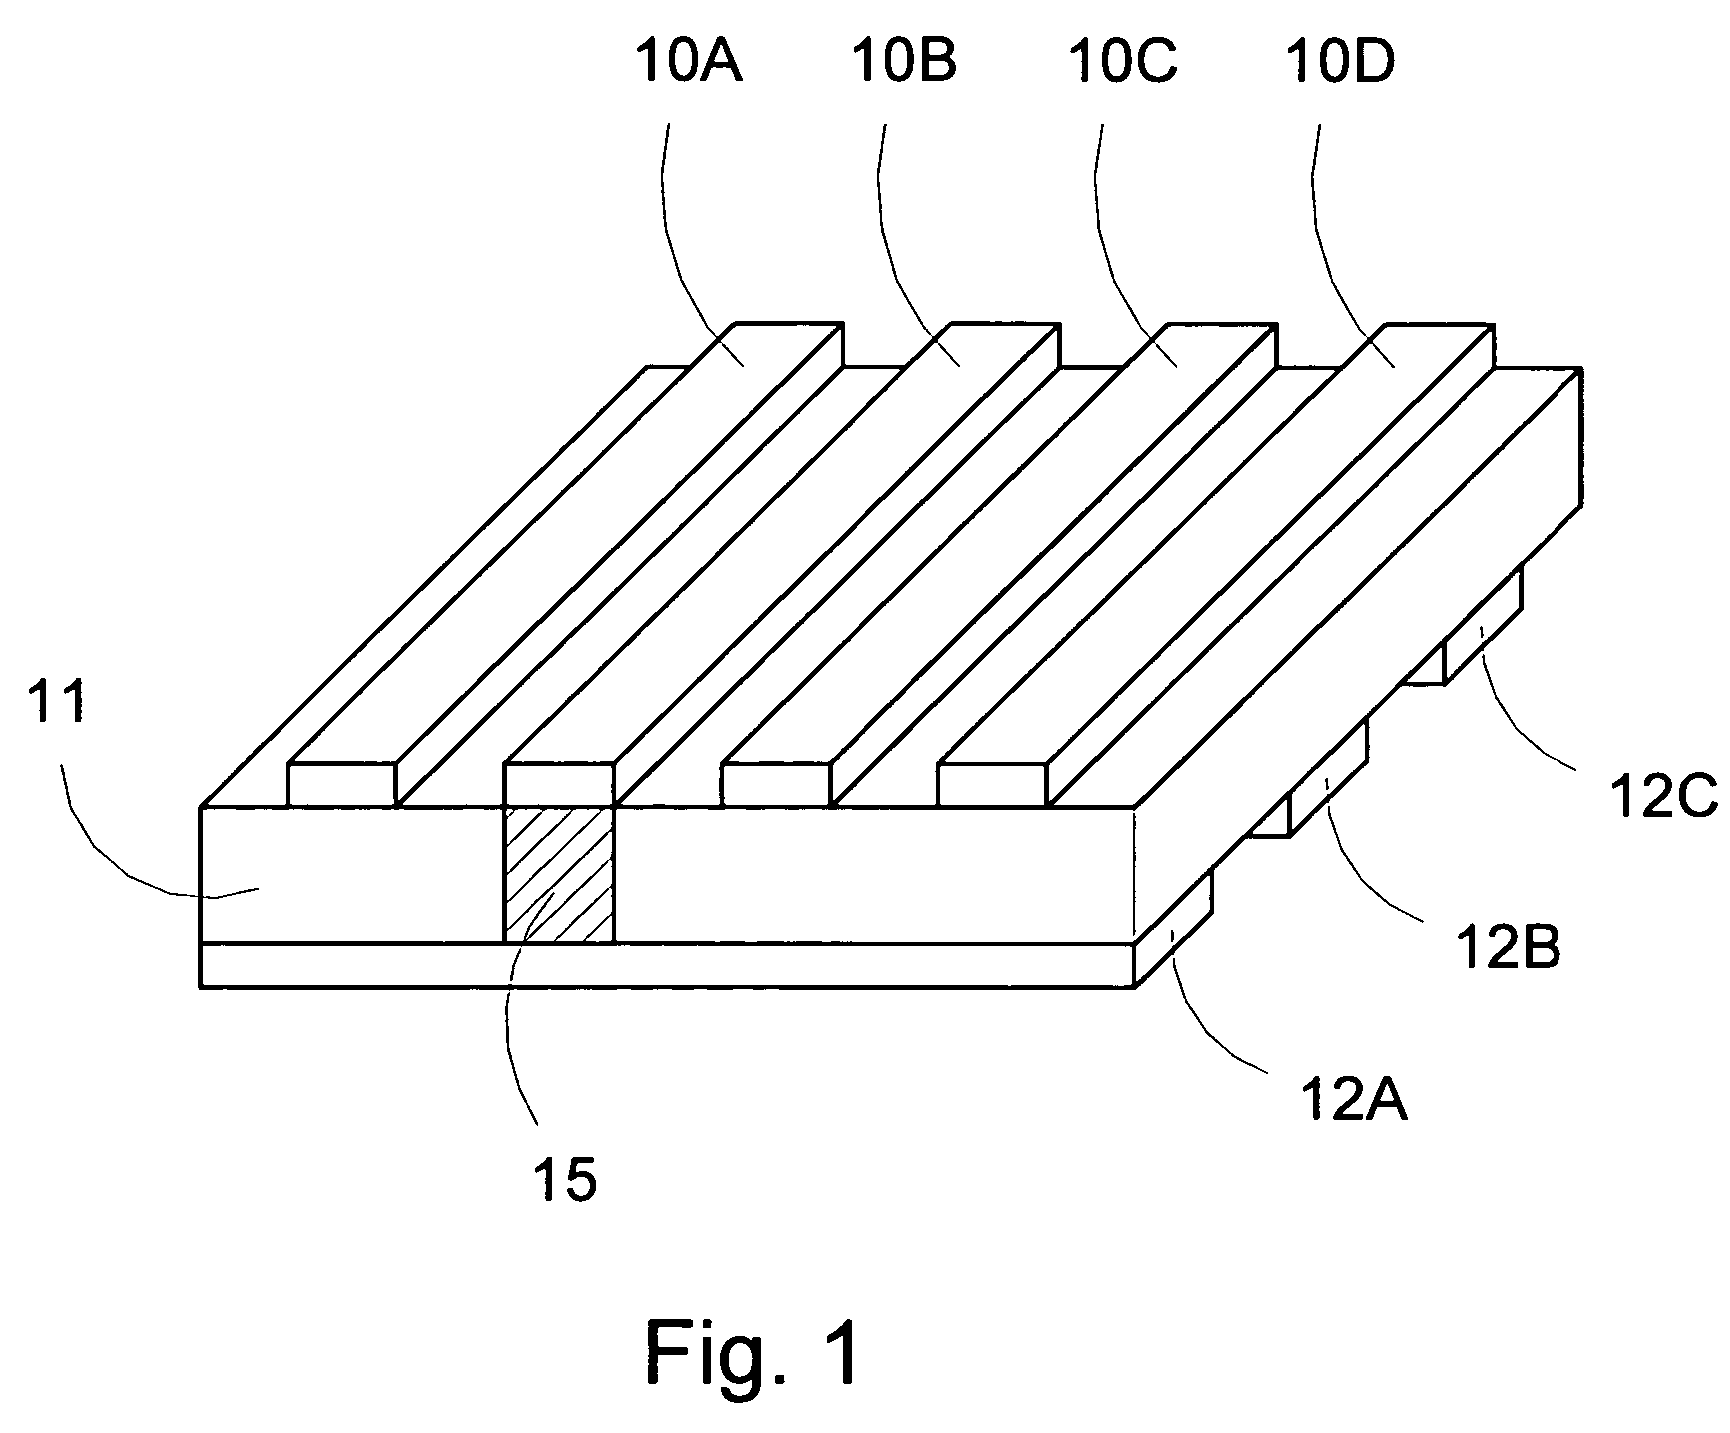 Method to fabricate a thin film non volatile memory device scalable to small sizes